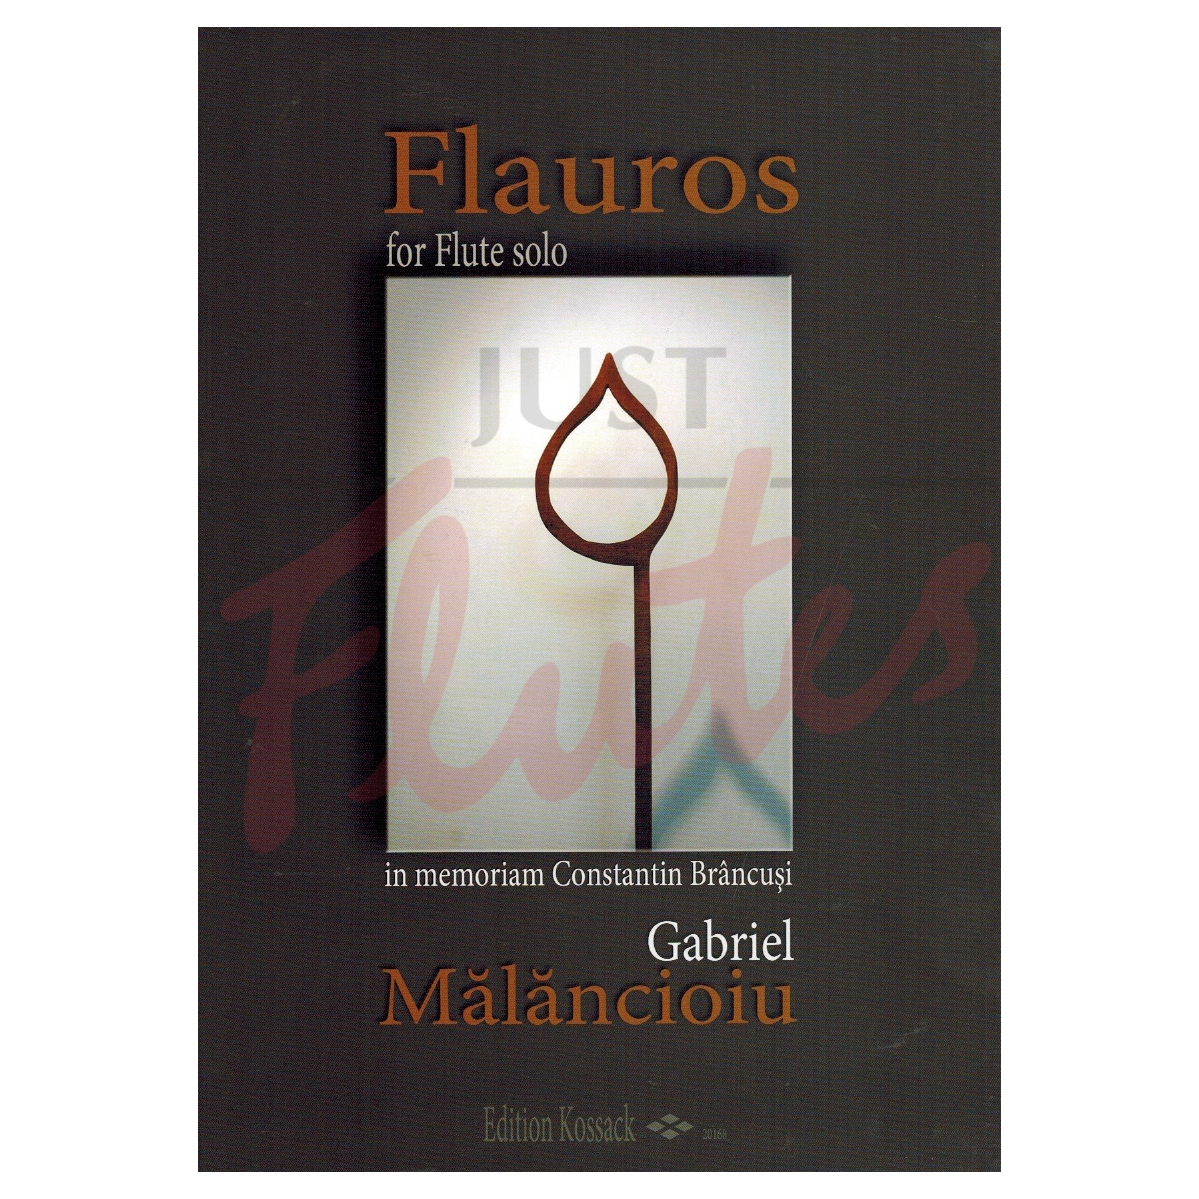 Flauros for Flute Solo